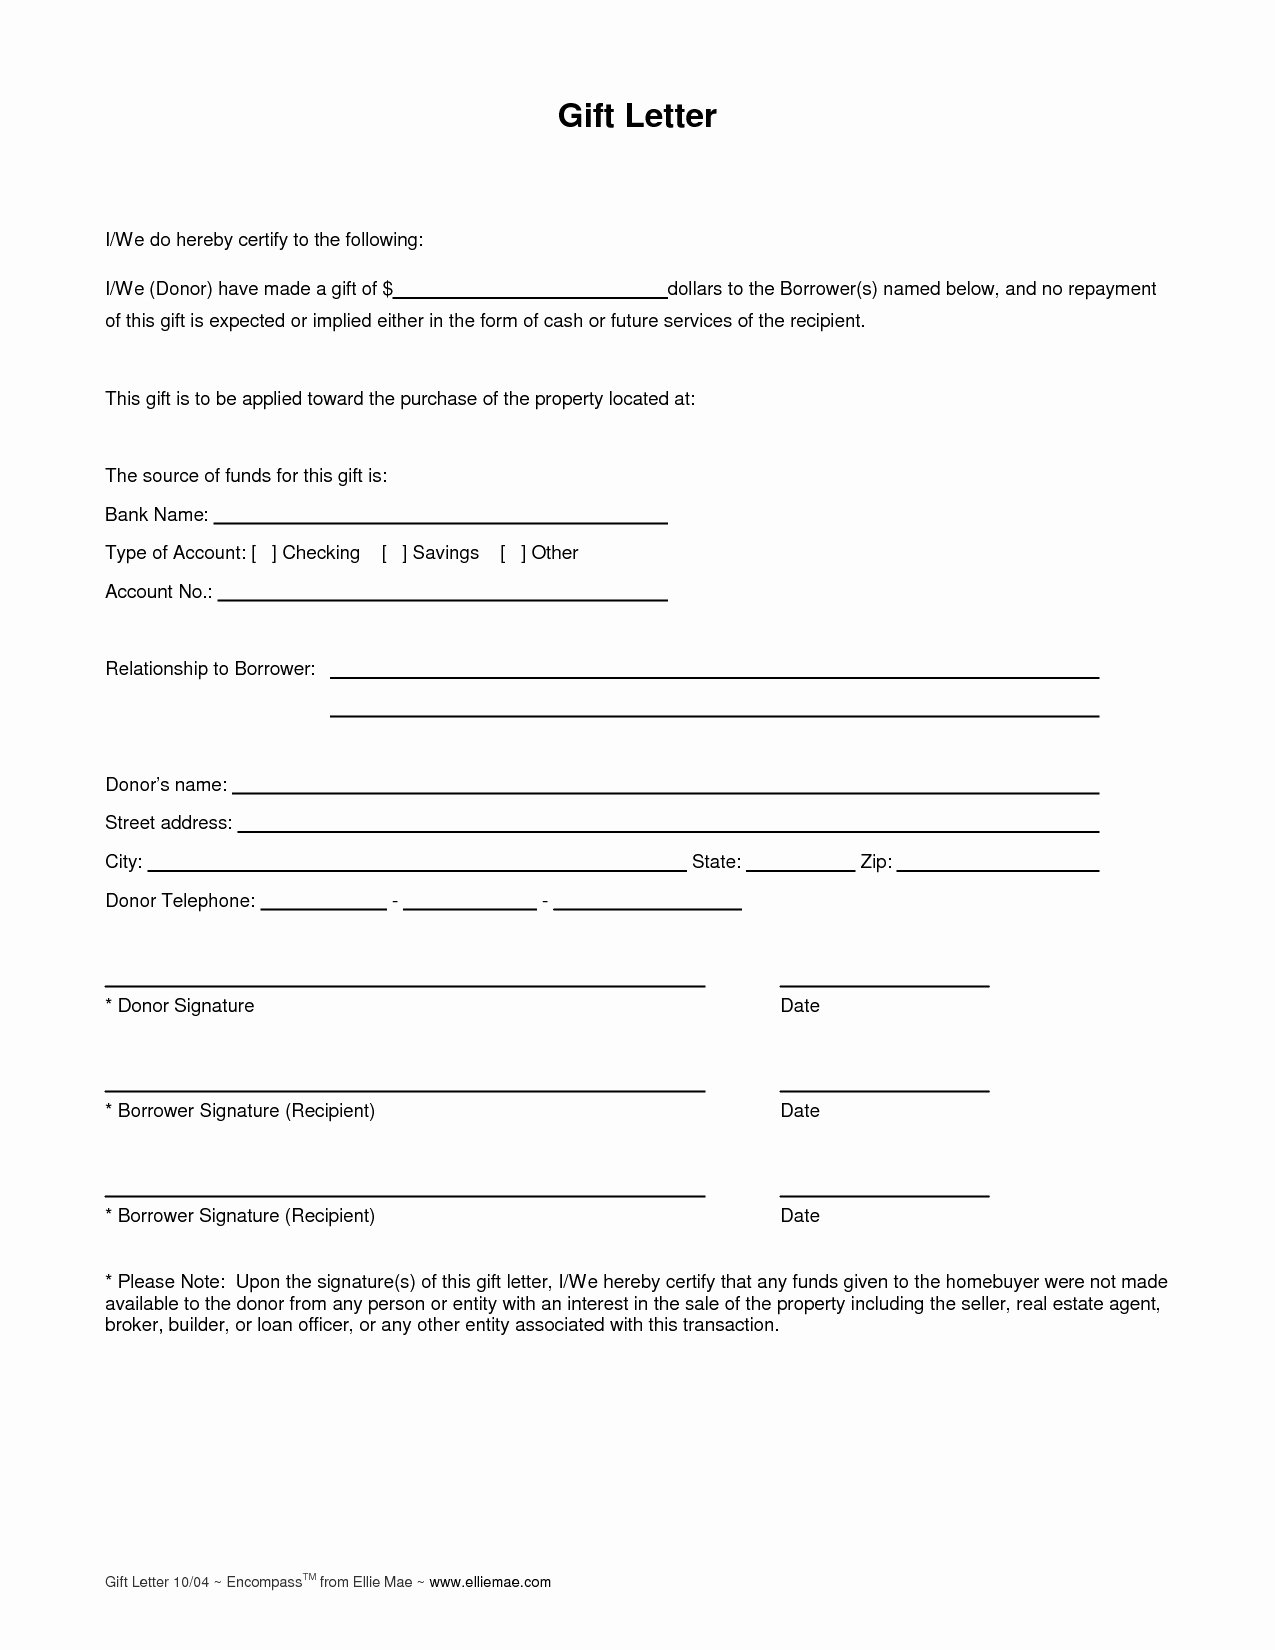 Mortgage Gift Letter Template